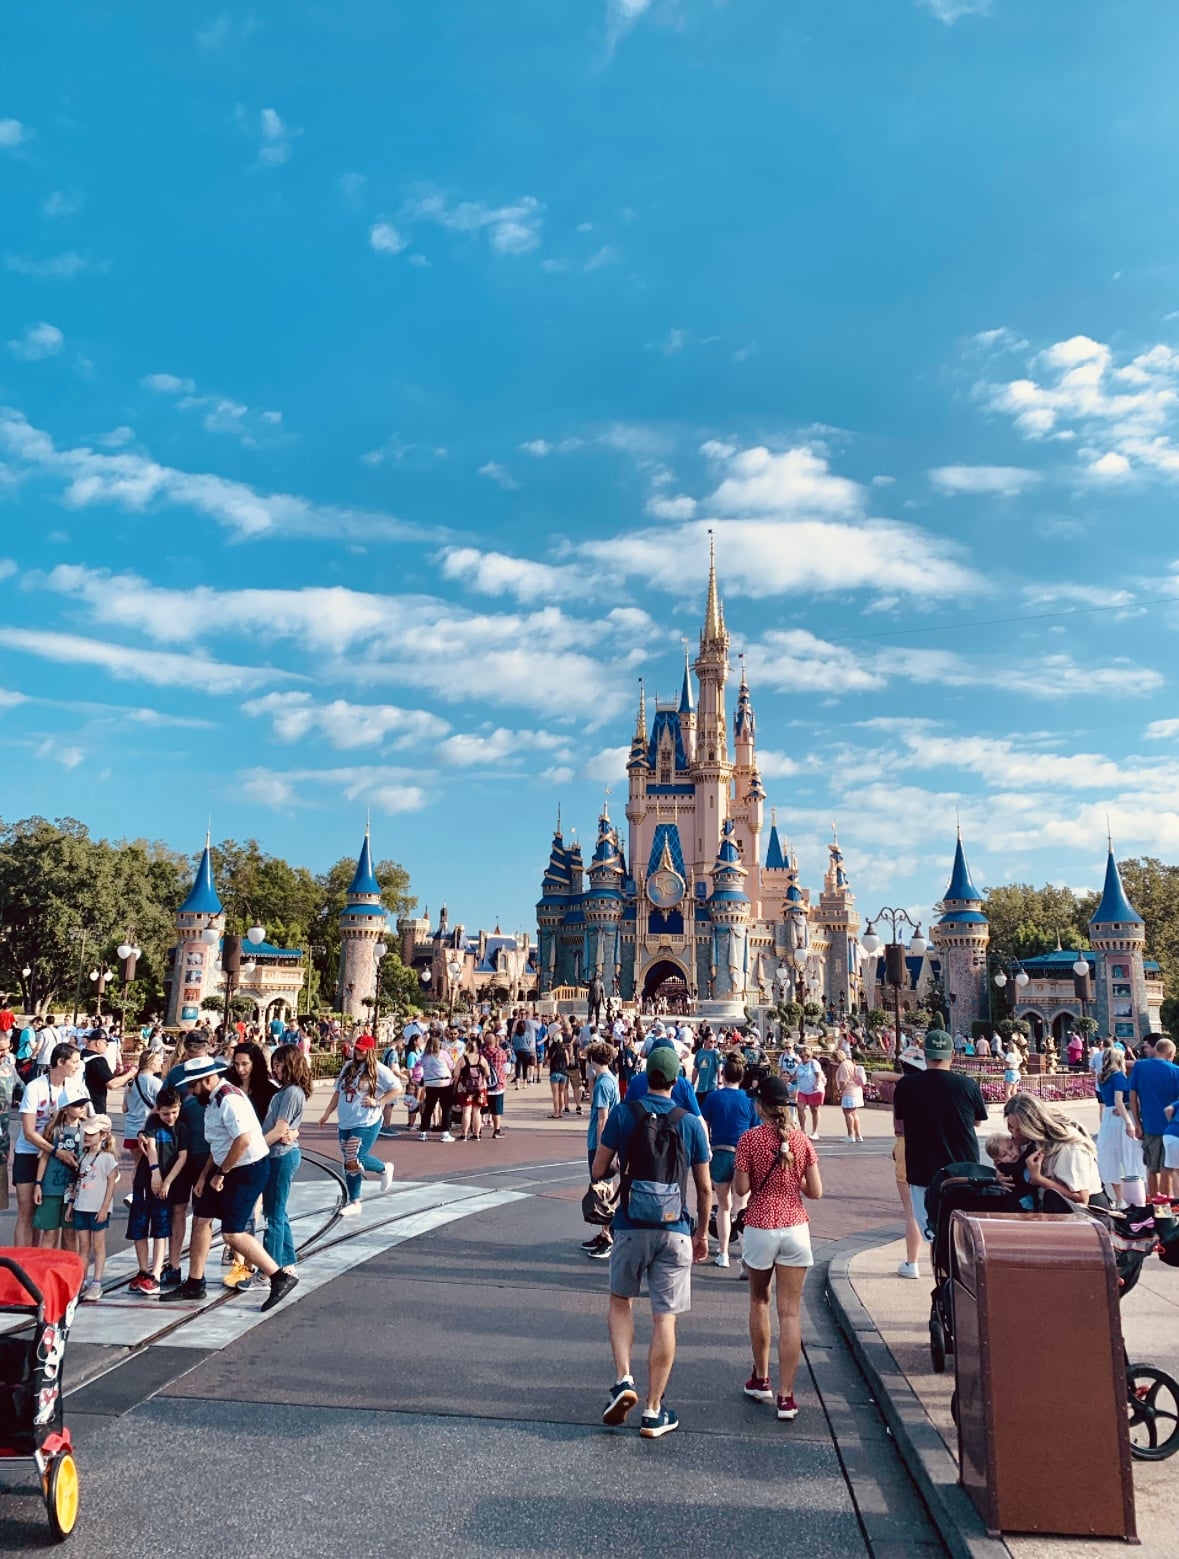 Magic kingdom mainstream crowd, view of Cinderellas castle with typical Disney crowd. Image illustrates how genie plus works to reduce wait times